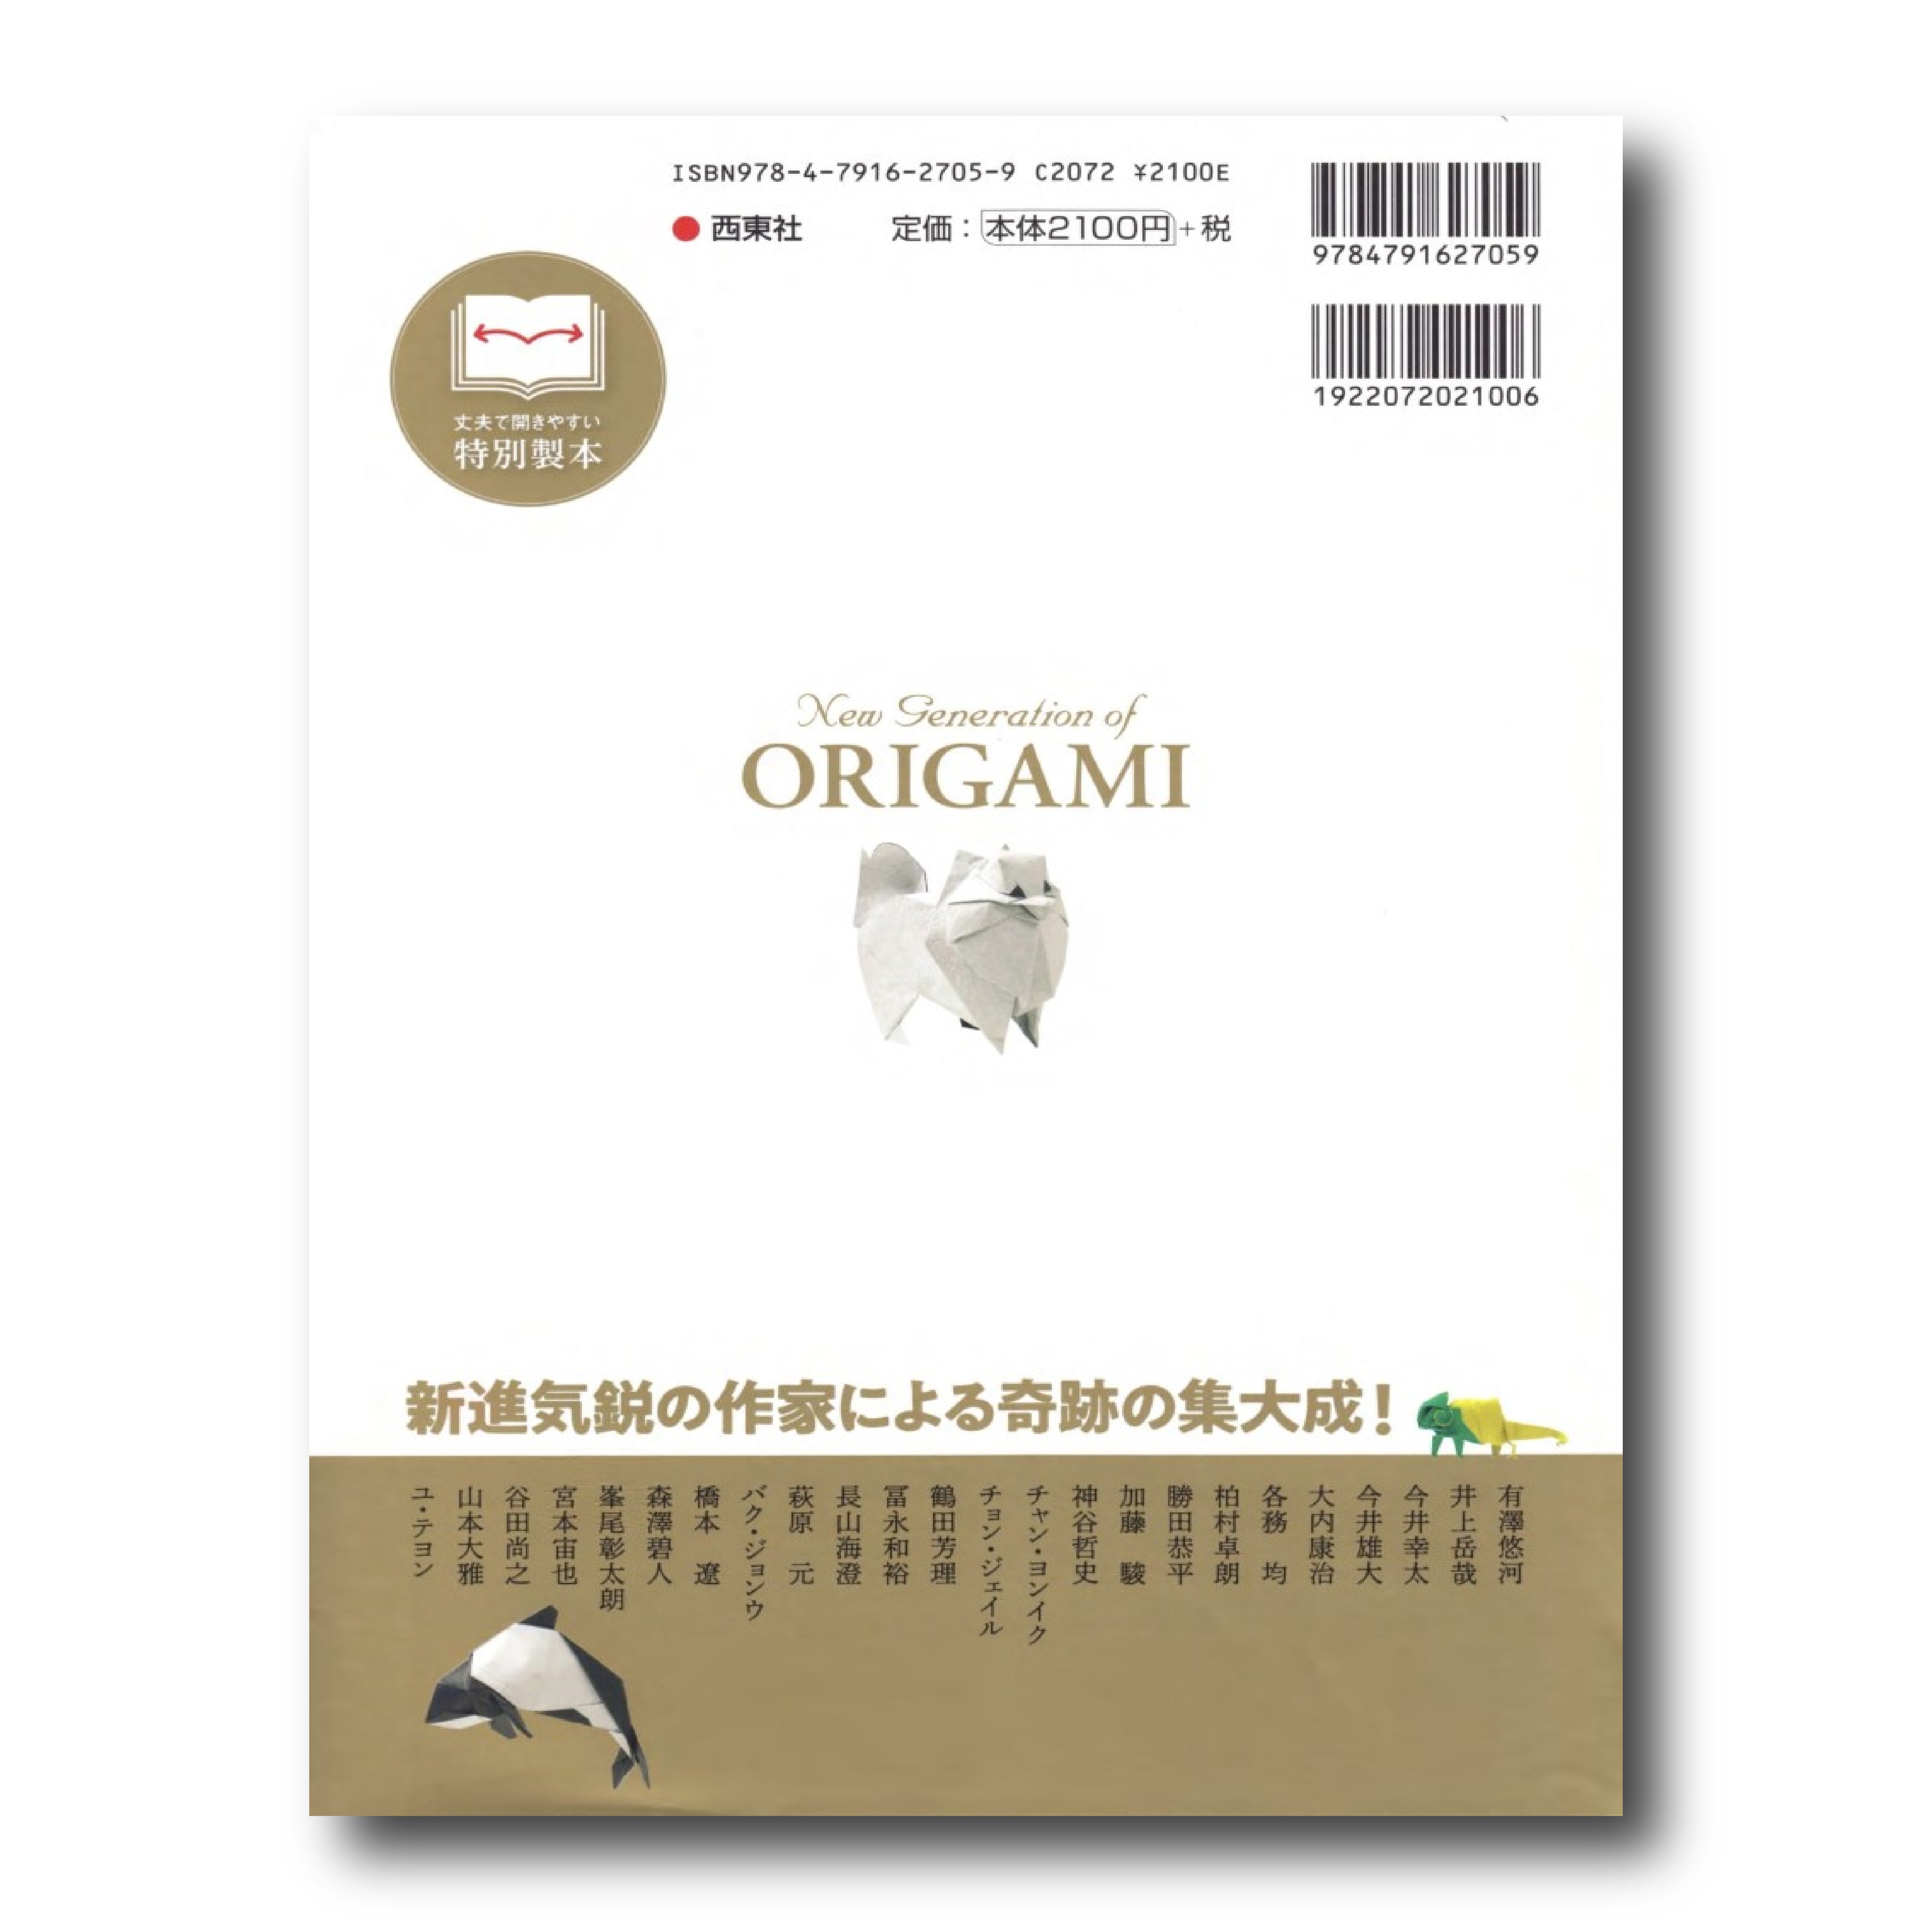 New Generation of Origami/新世代 至高のおりがみ (Japanese Edition 